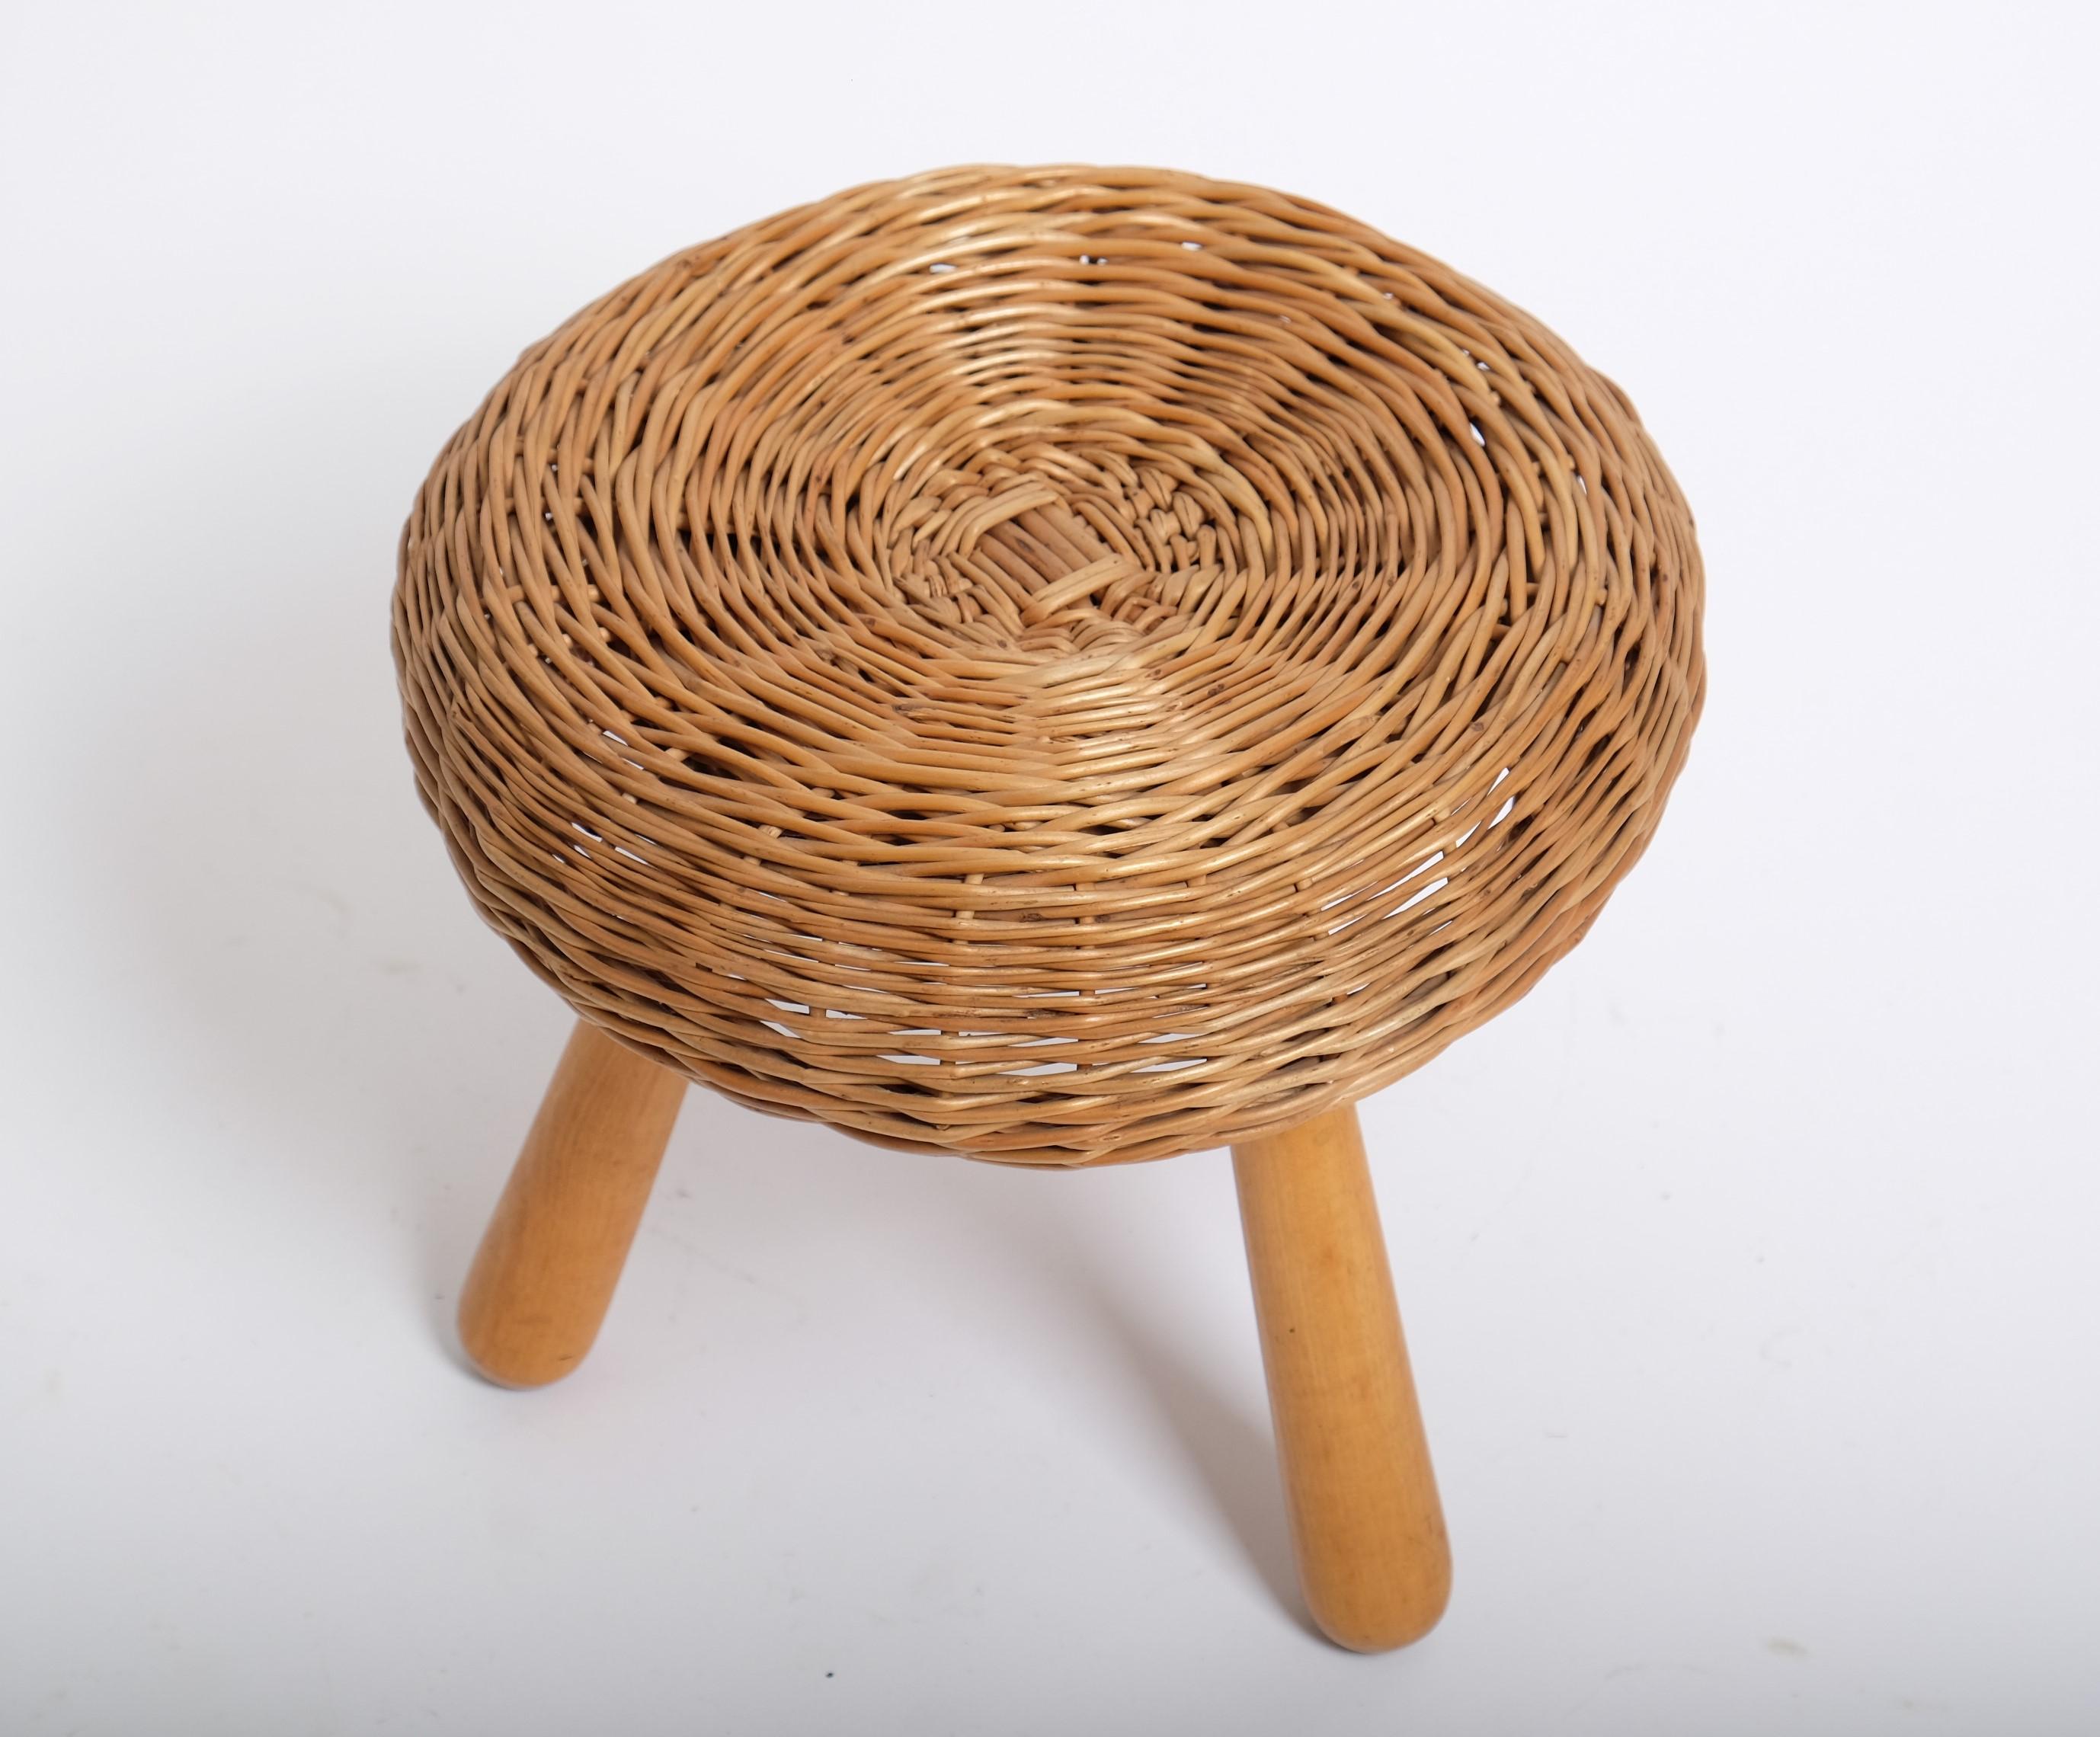 Tony Paul 'Attributed' Stool Wicker Wood, United States 1950s For Sale 3